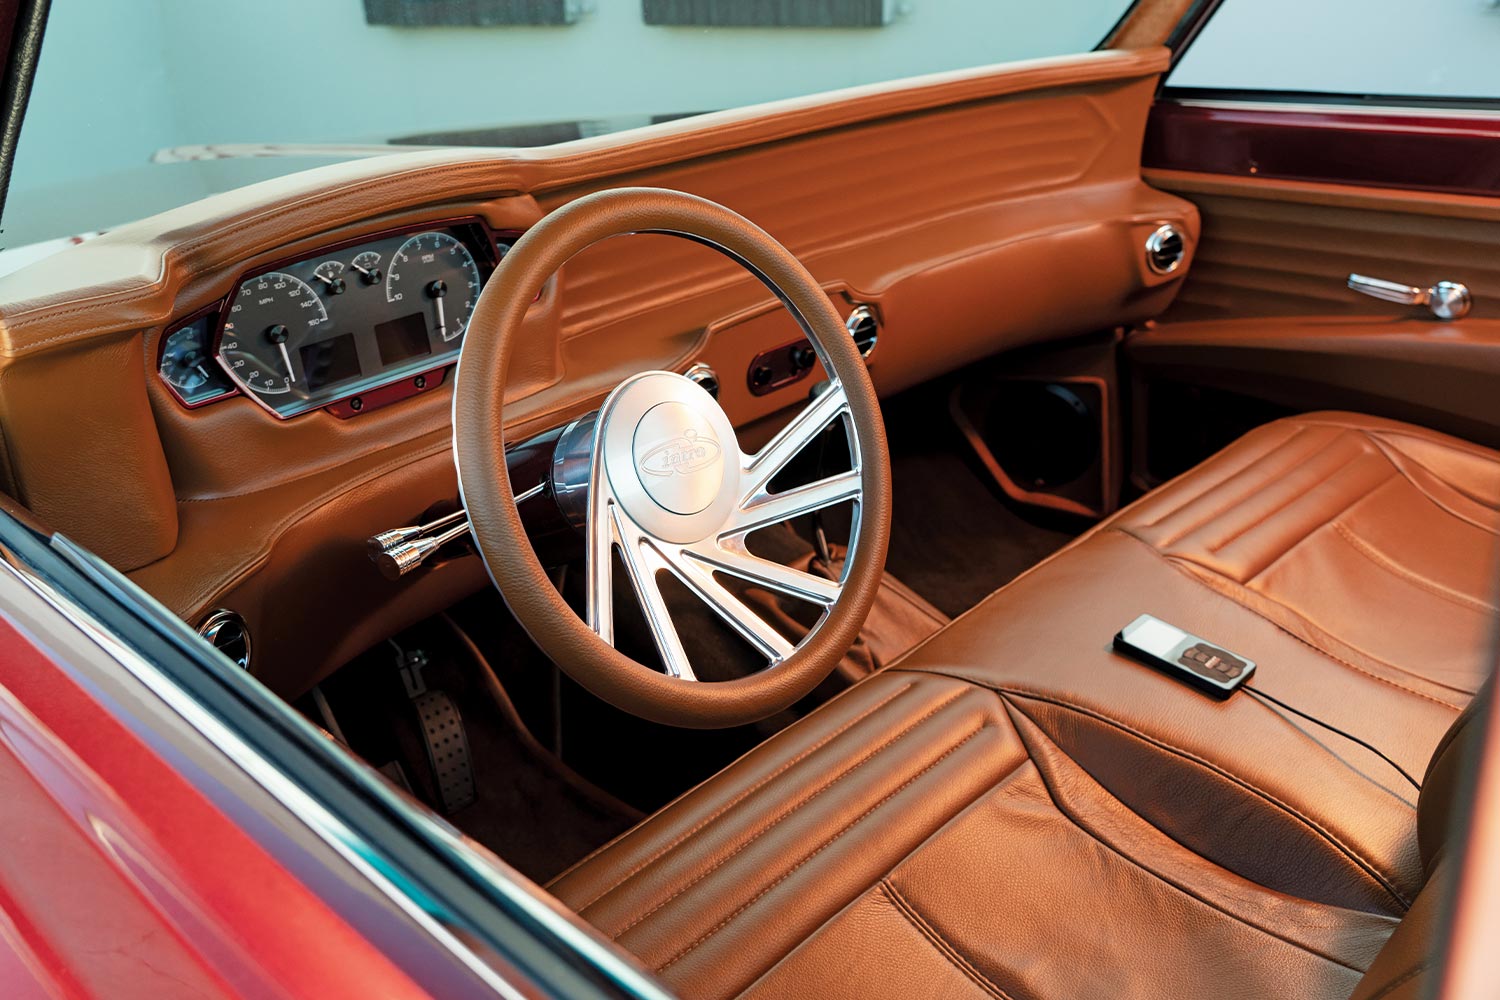 view from outside the driver side opened window of the ’68 Chevy C10, featuring the brown leather covered dashboard, steering and seating